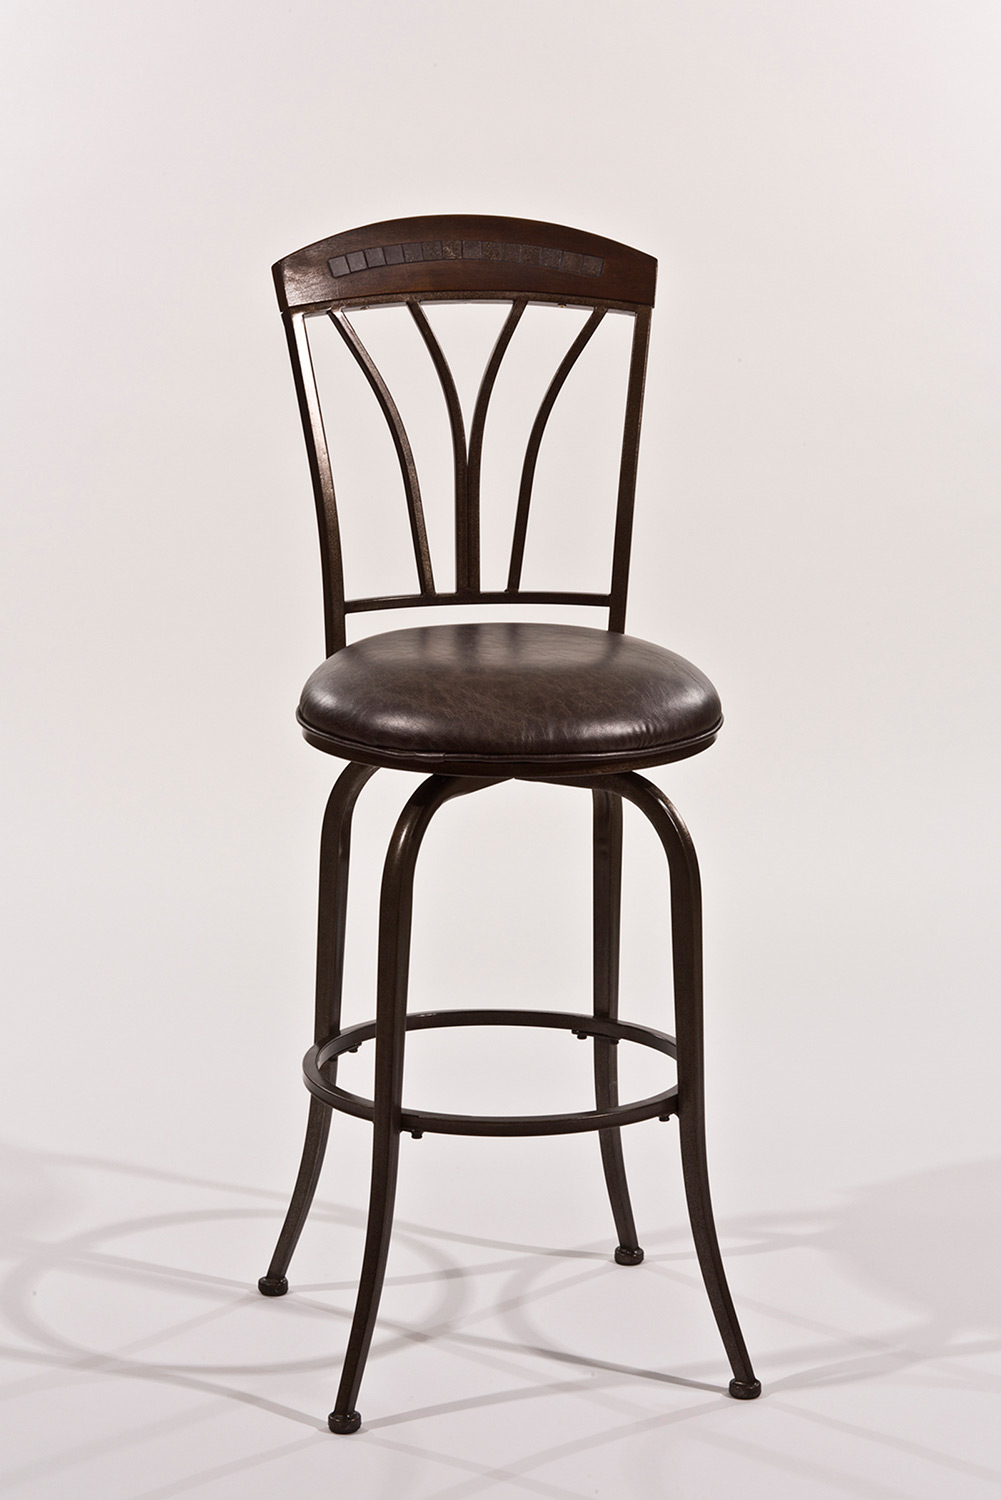 Hillsdale Marano Swivel Bar Stool - Speckled Bronze Pewter - Charcoal Faux Leather